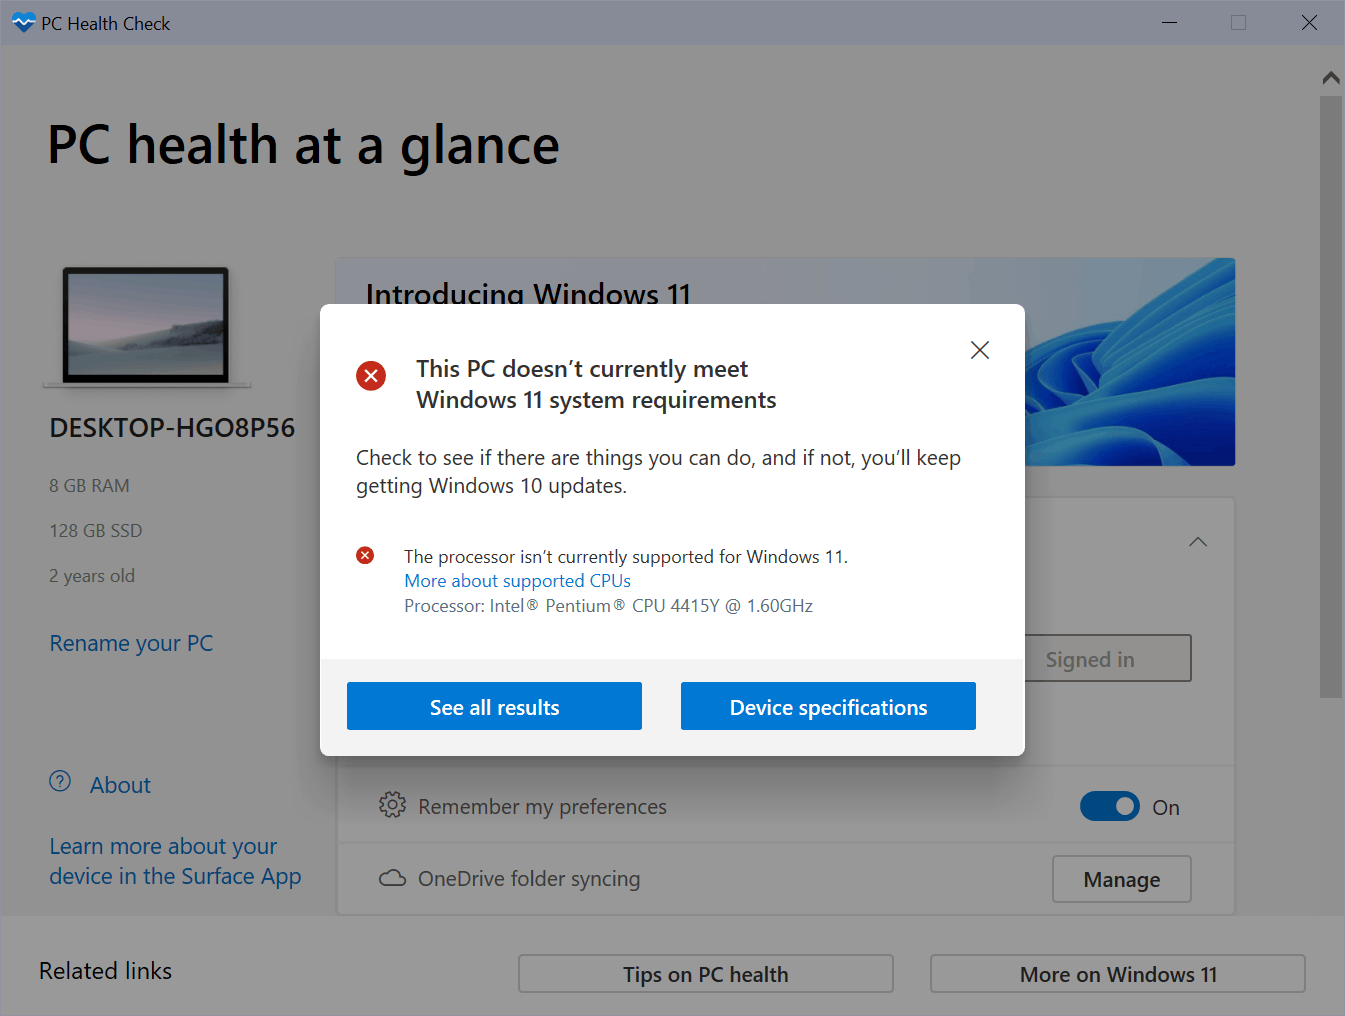 Windows 11 will be offered to all eligible PCs ahead of schedule pc-health-check-windows-11-requirements.png